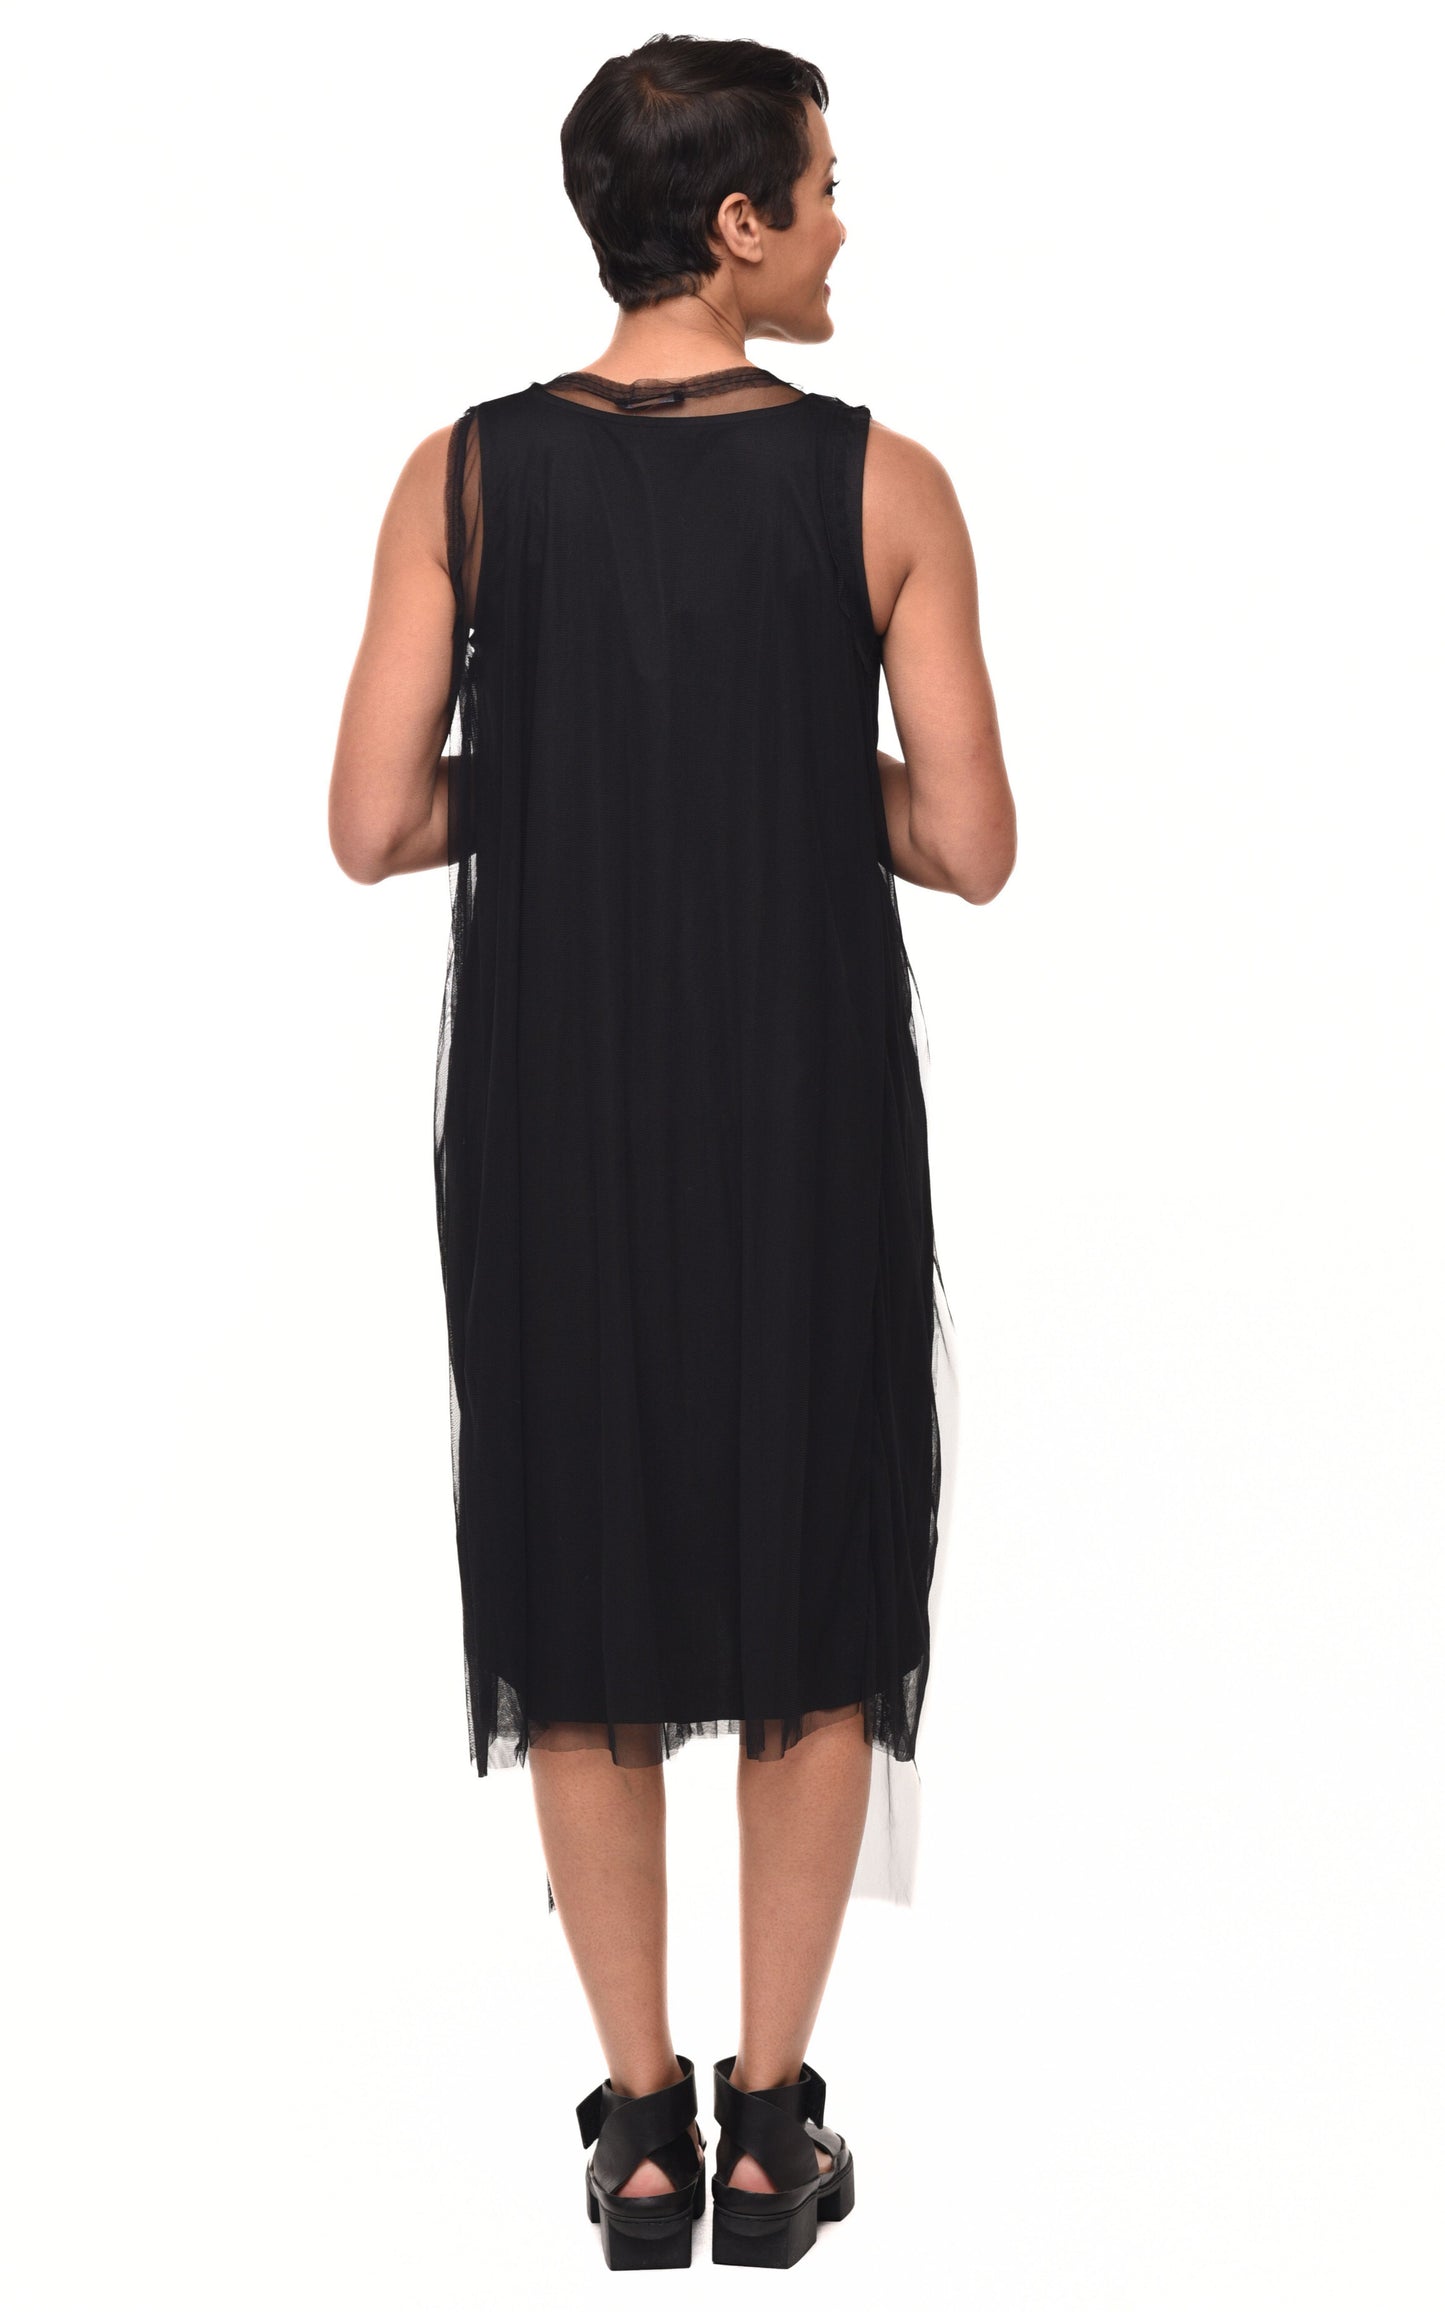 M201 Martine Dress in Black with Liner*